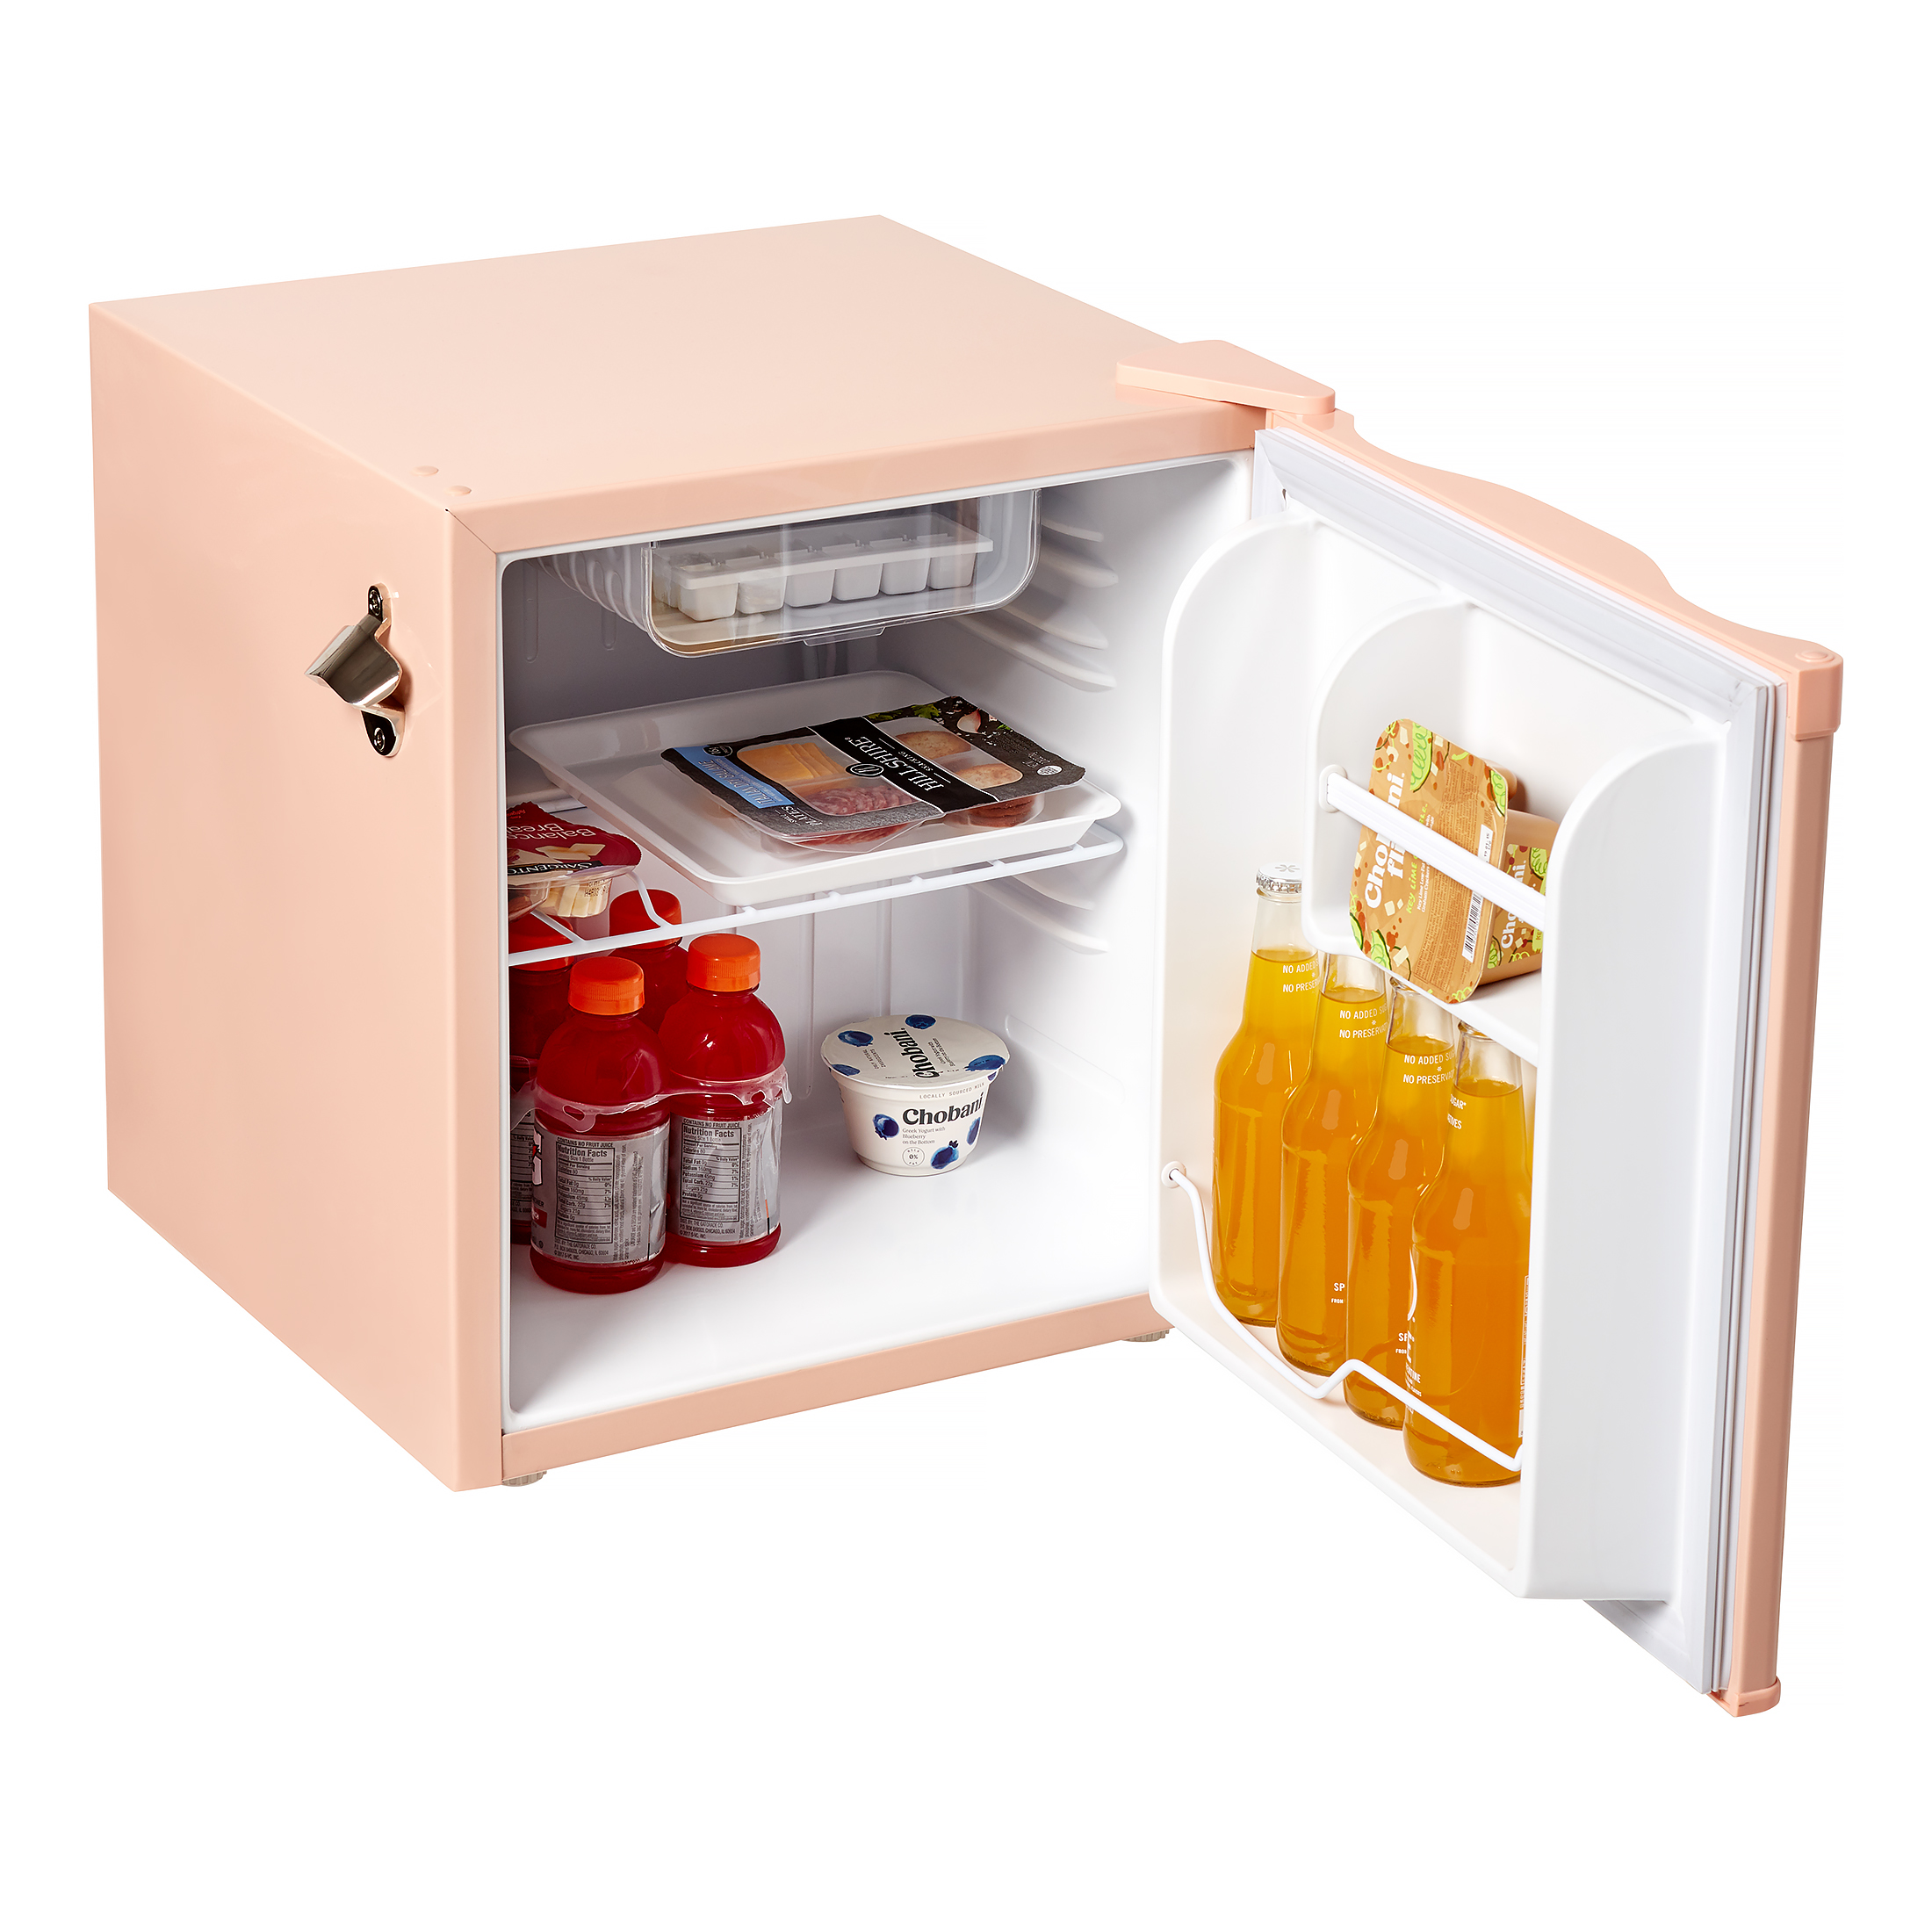 Frigidaire 1.6 Cu ft. Retro Compact Refrigerator with Side Bottle Opener, Coral - image 5 of 7